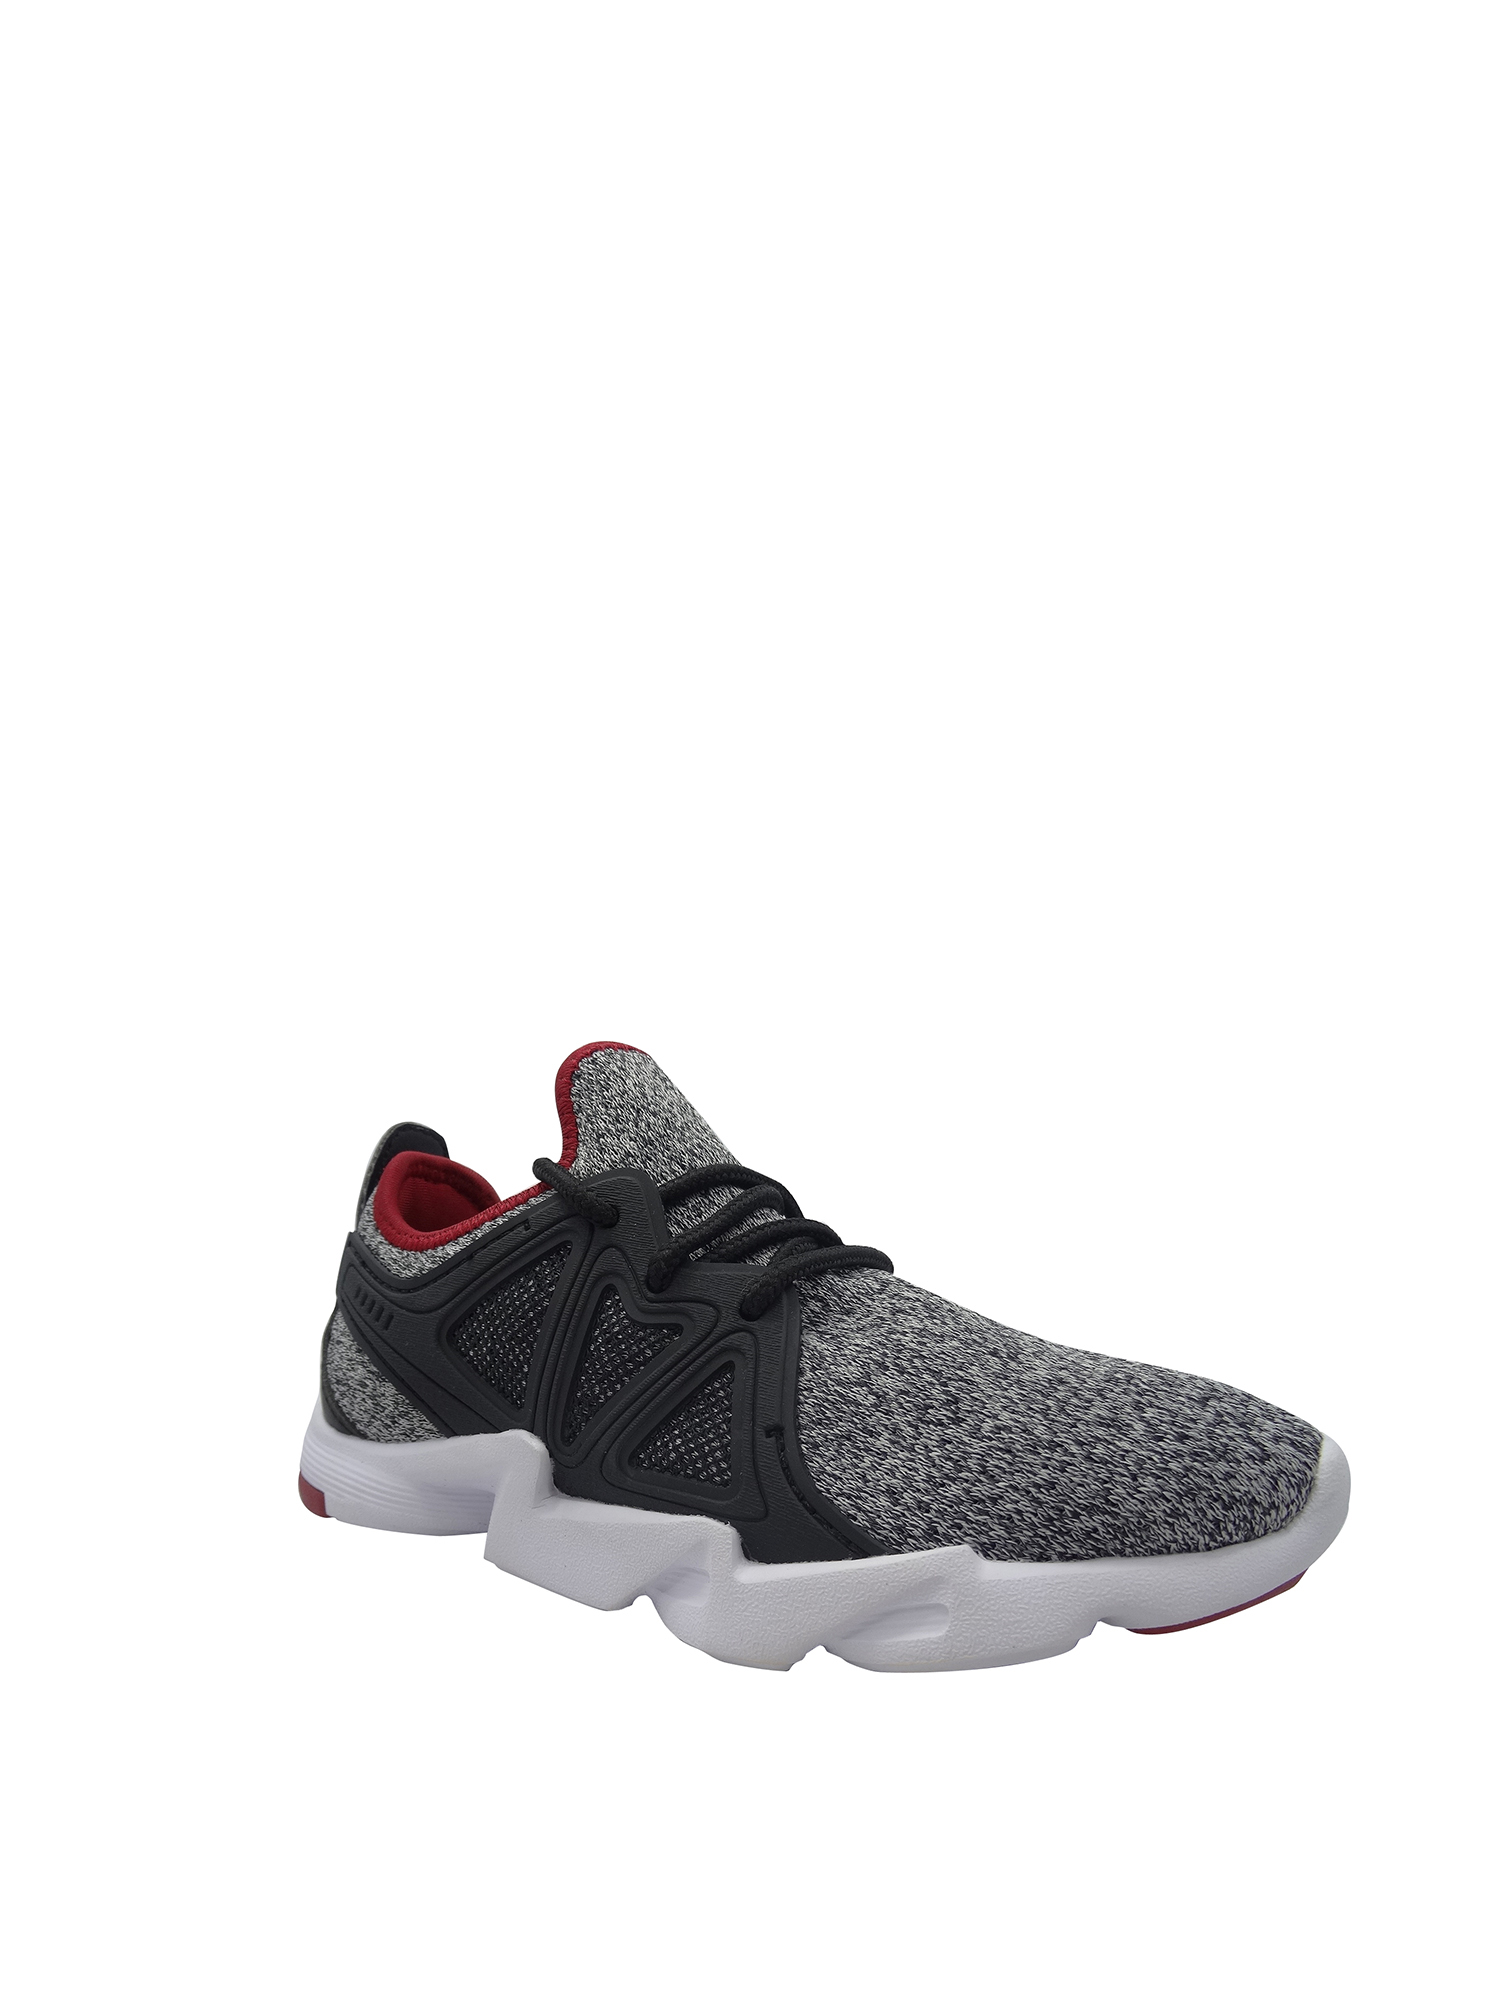 Boy's Lightweight Knit Athletic Shoe - image 1 of 5